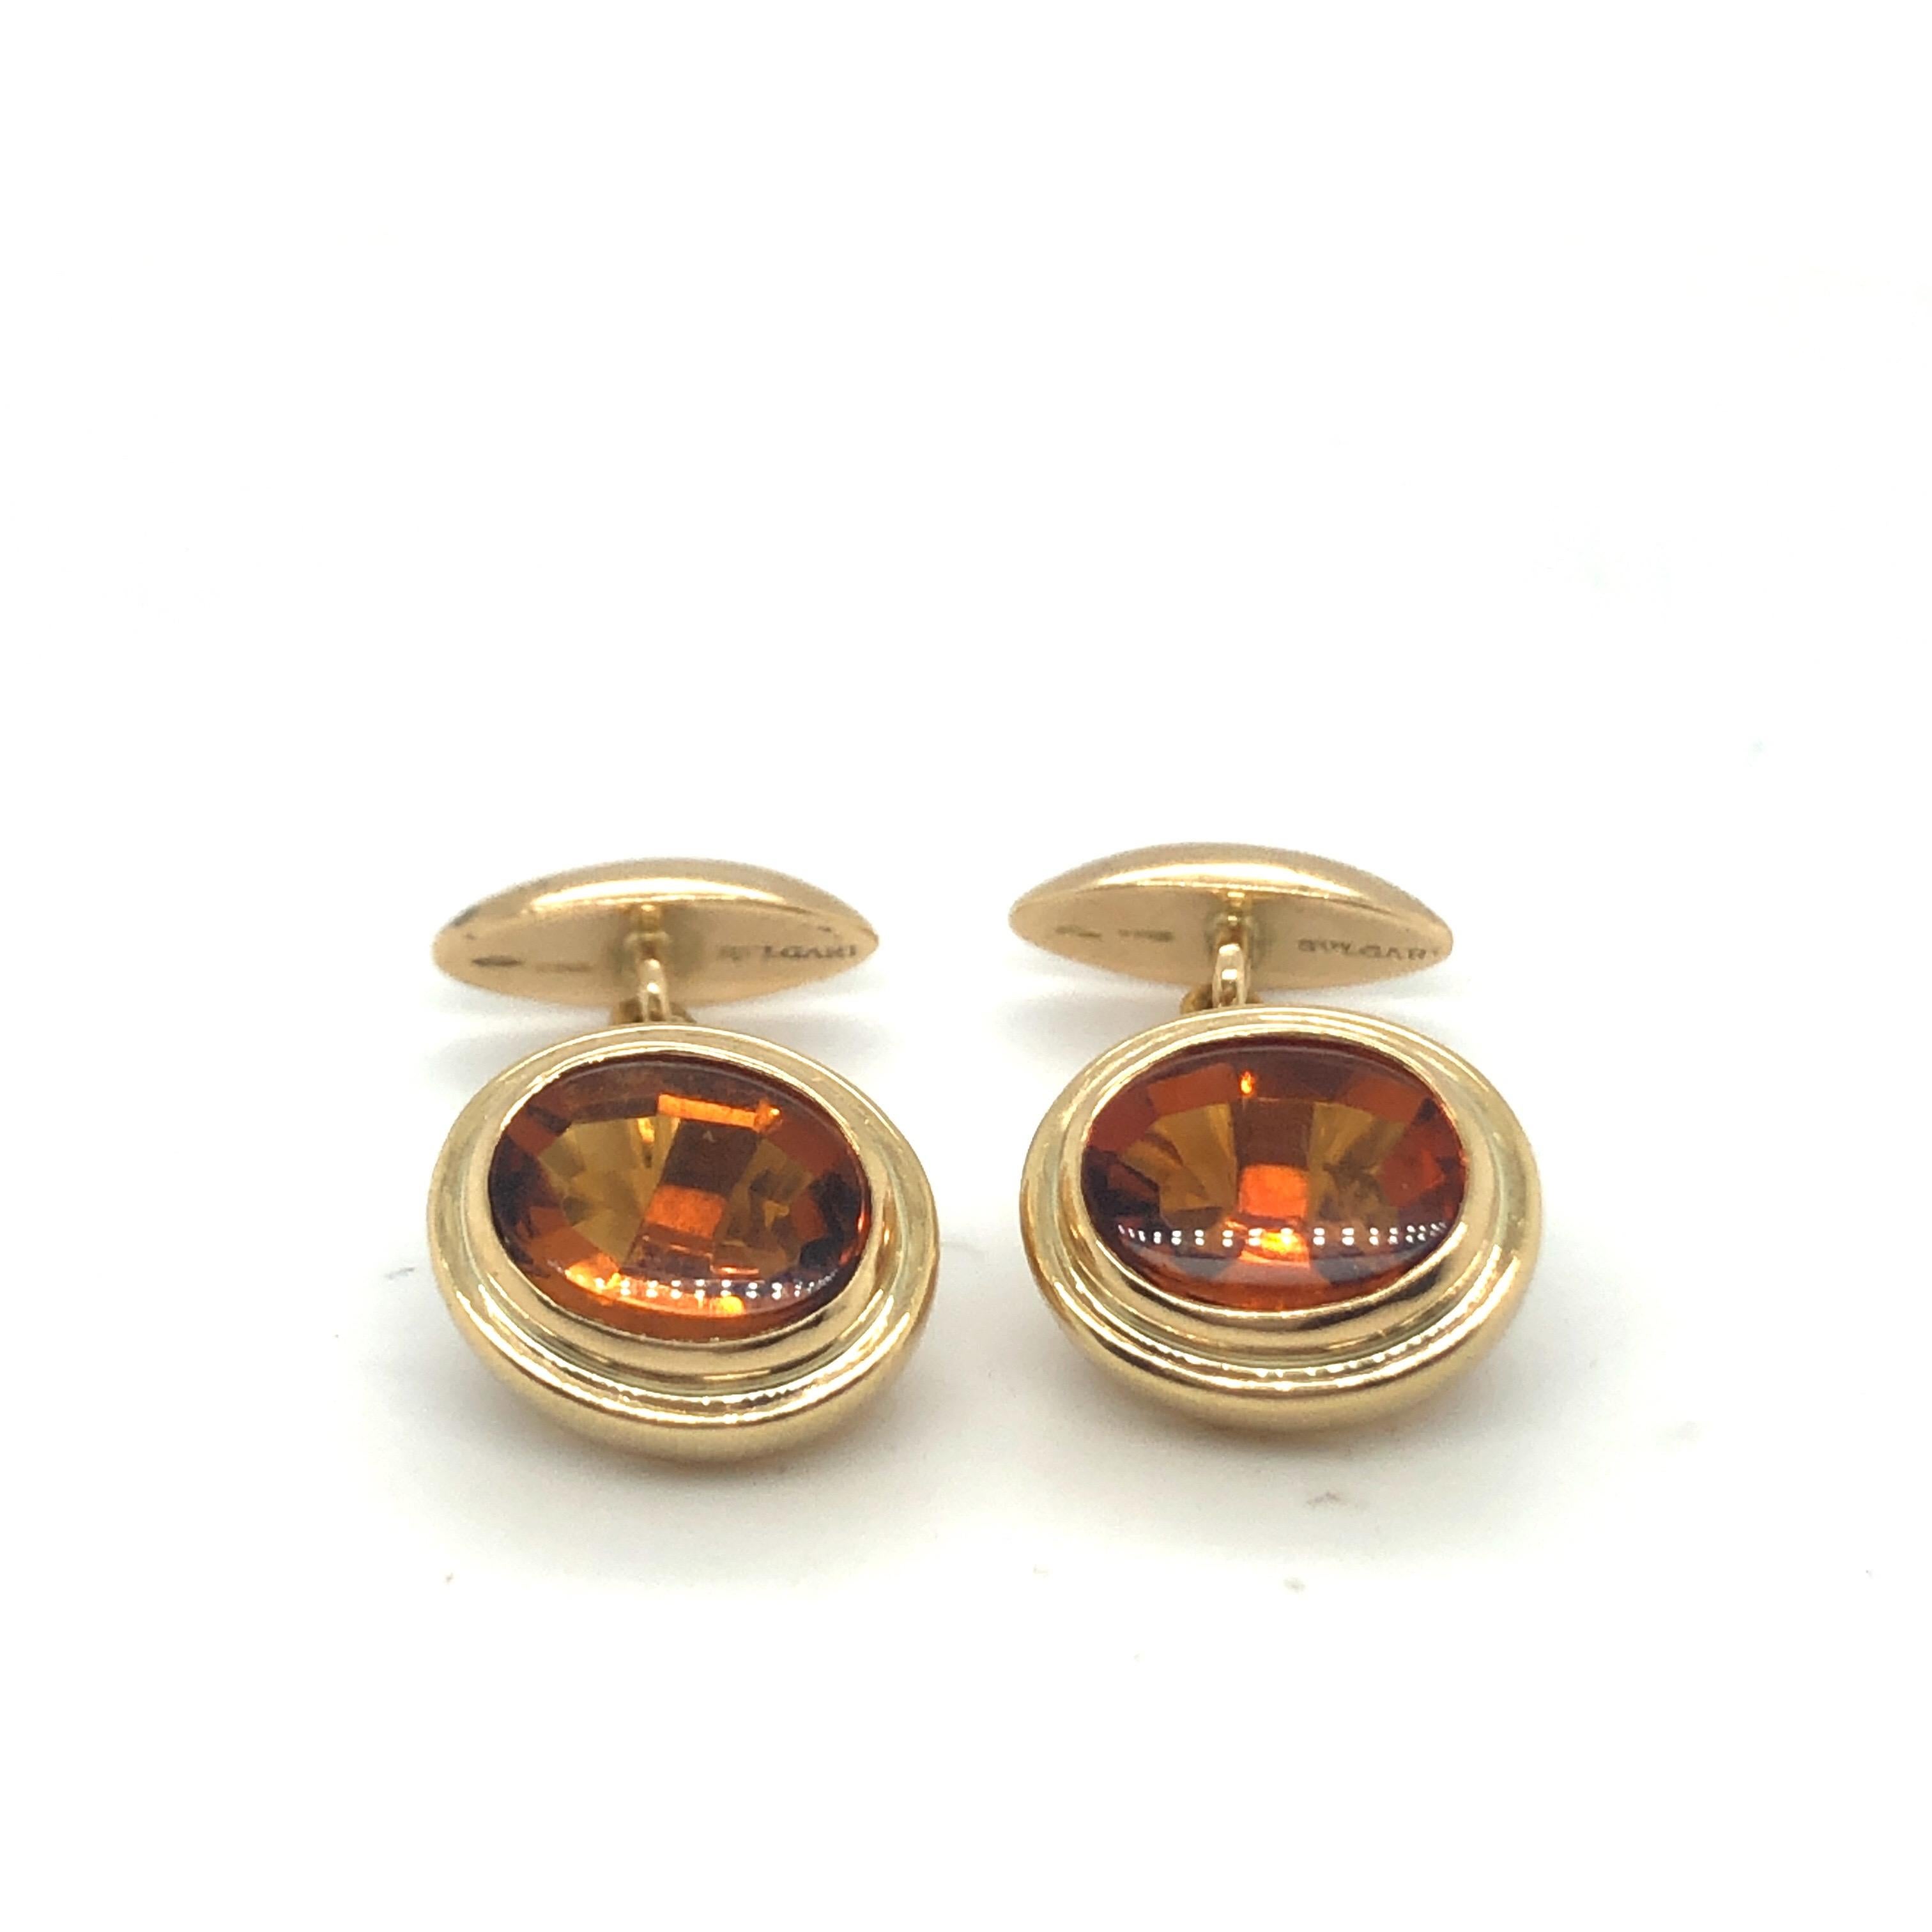 Handsome pair of 18 karat yellow gold and citrine chain link cufflinks by the prestigious Italian brand Bvlgari.
The faces of these cufflinks are bezel set with two oval citrines featuring a slightly domed polished crown and a faceted pavilion.